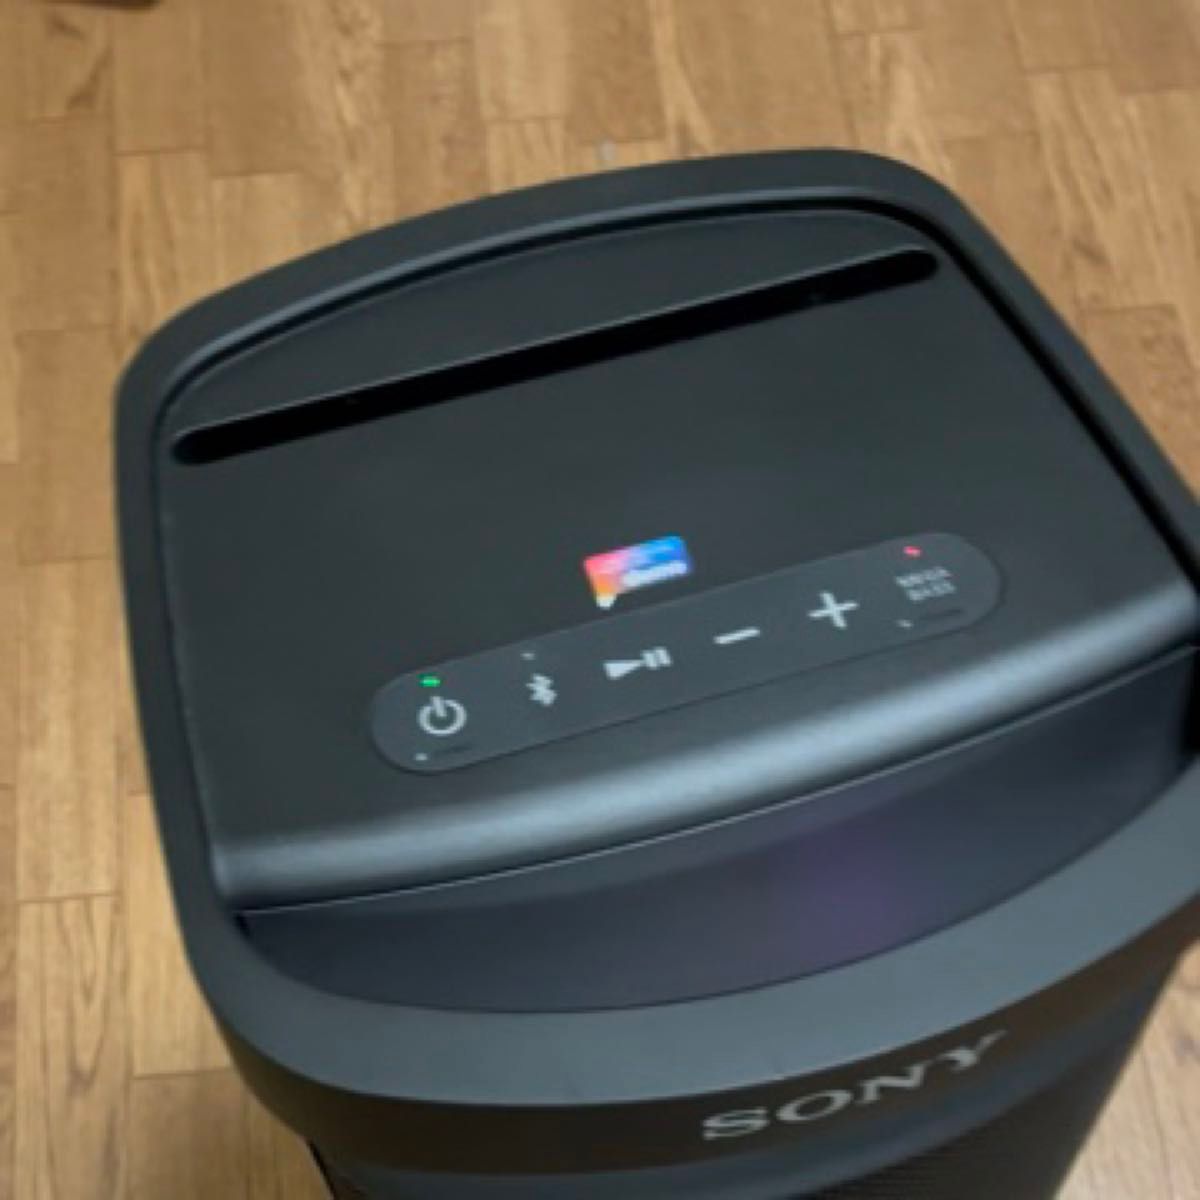 SONY 重低音　SRS-XP500 ワイヤレススピーカー　中古